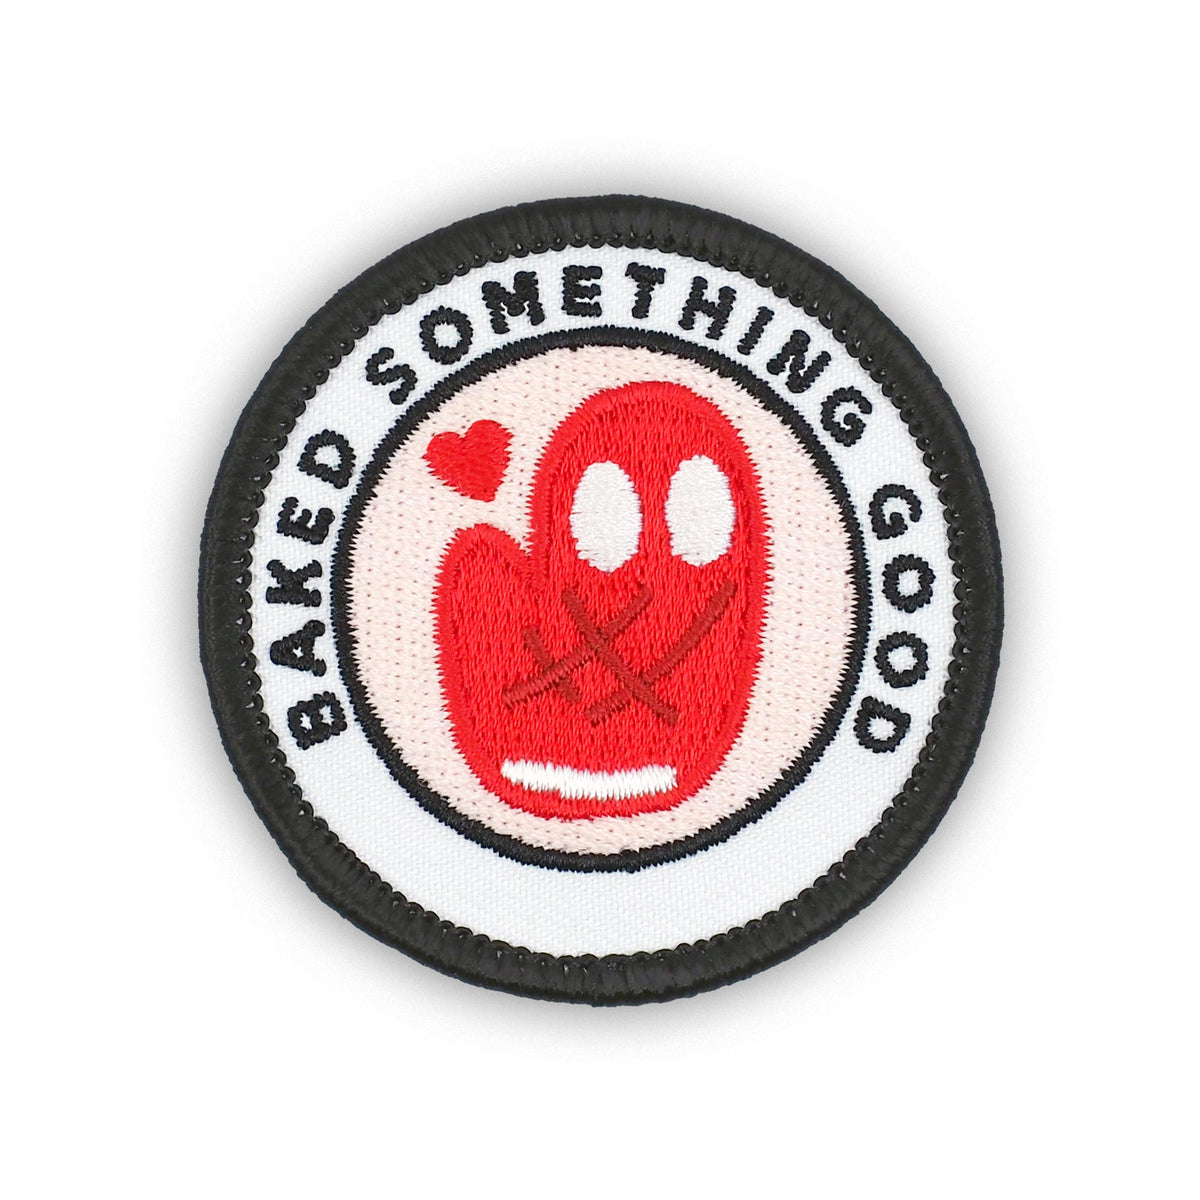 Baked Something Good Oven Mitt individual adulting merit badge patch for adults